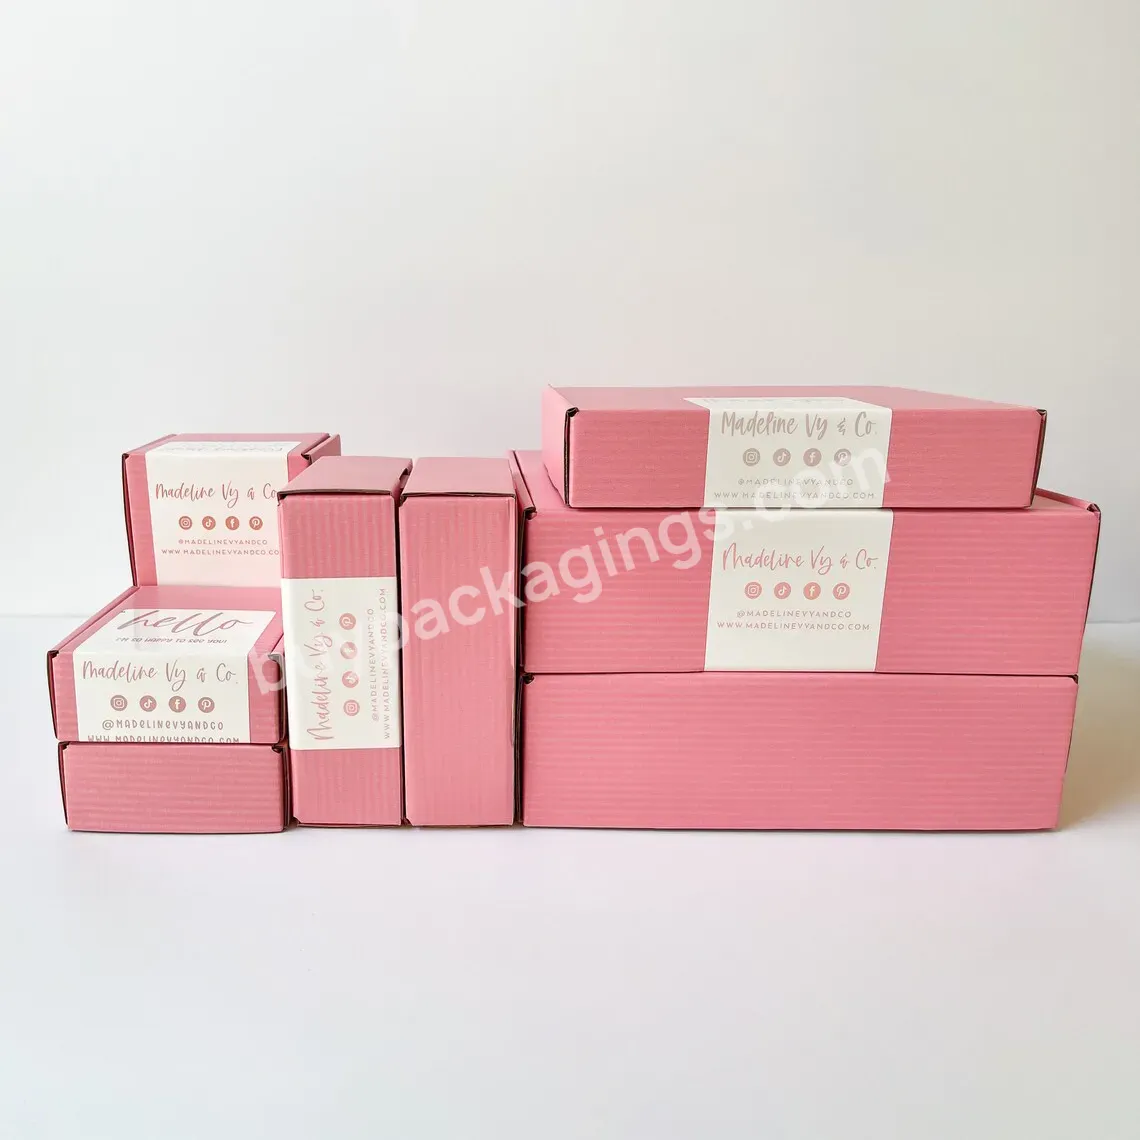 Oem Custom China Manufacturer High-quality Mailer Rigid Corrugated Clothing Cardboard Wholesale Carton Beer Paper Box Packaging